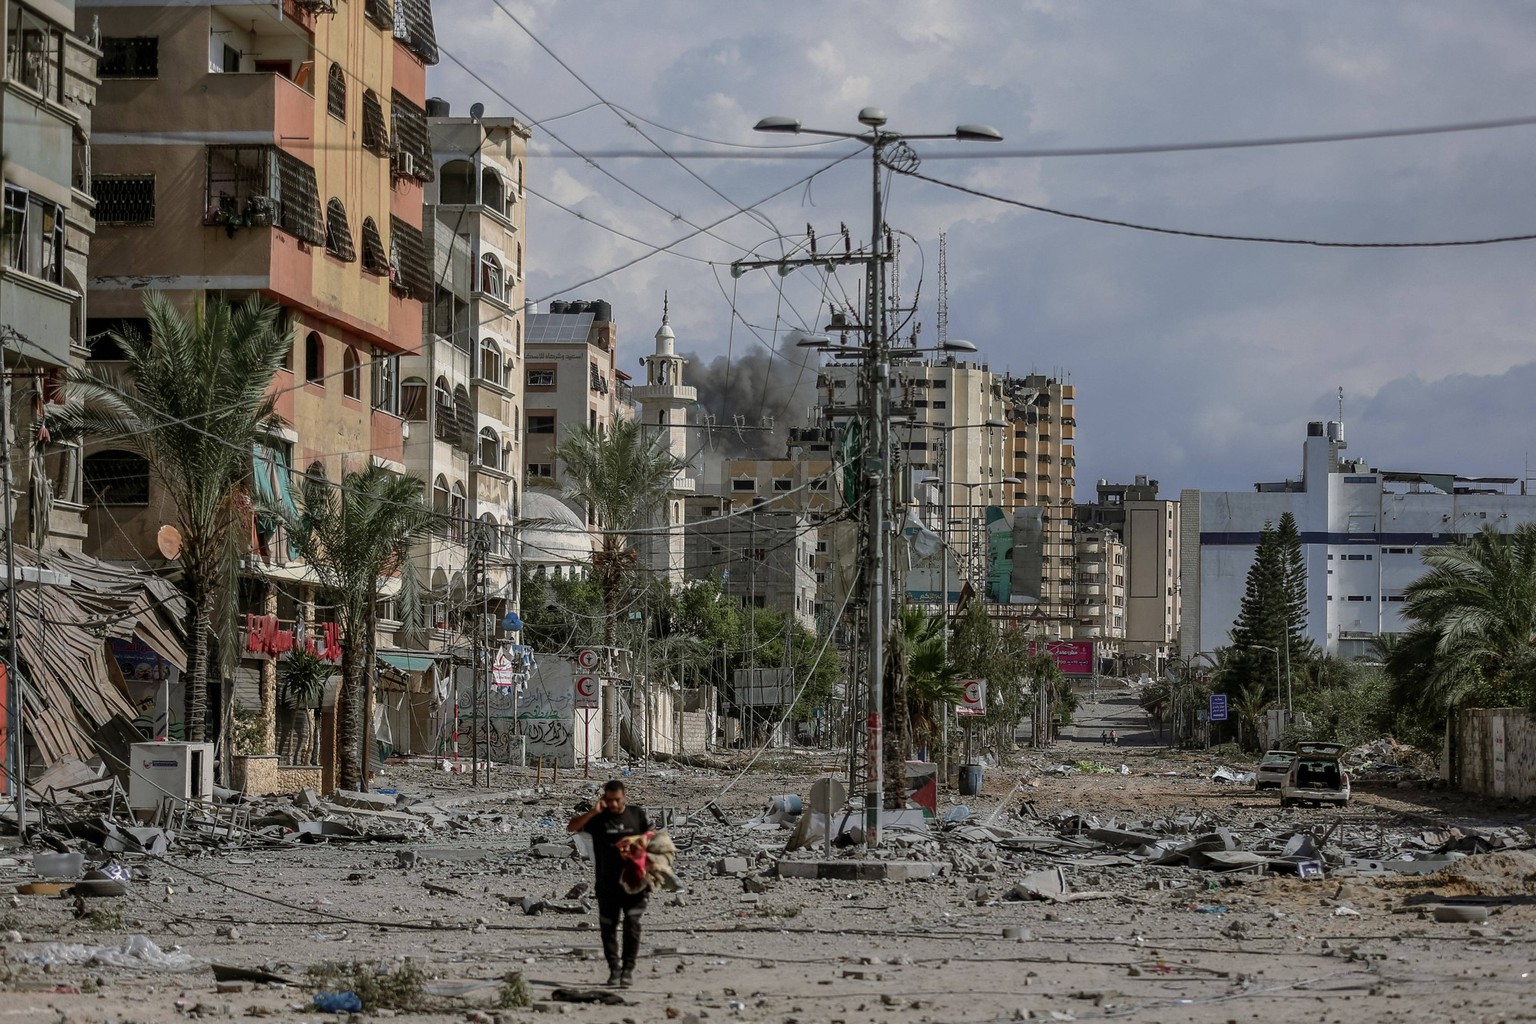 Humanitarian Catastrophe Looms After Israeli Attacks - Gaza People walking amidst the destruction of houses and streets in Khan Yunis, located in the southern Gaza Strip, amid the devastation caused b ...